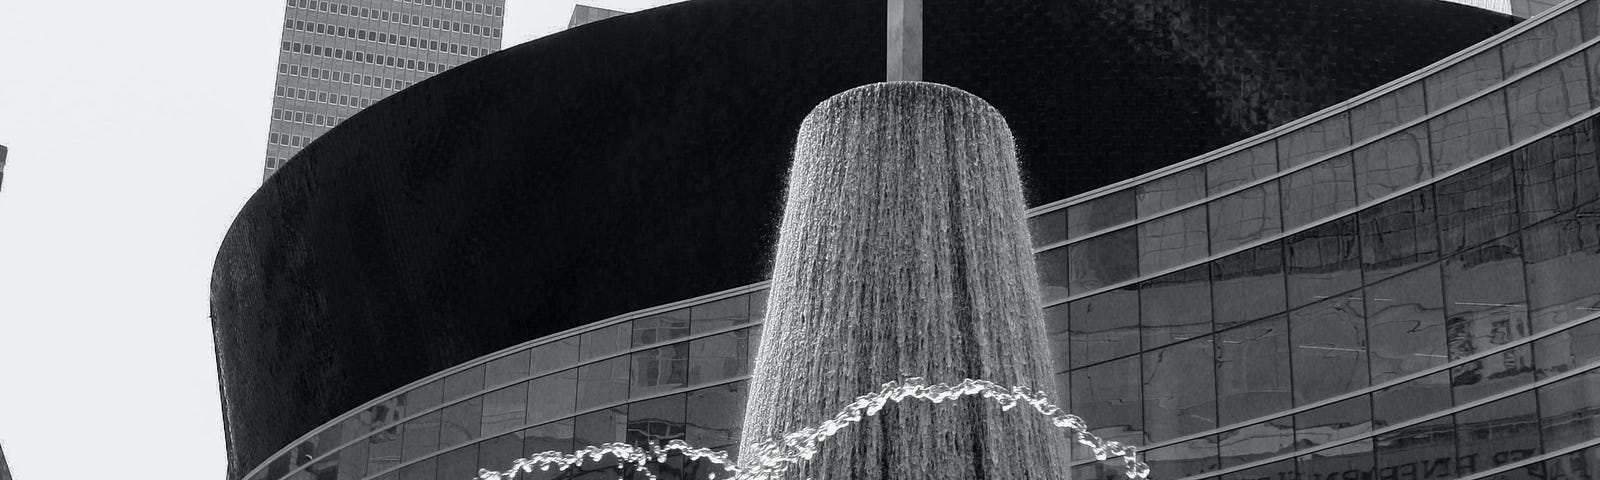 A black and white photo of the headquarters of the Southern Baptist Convention. A several story rounded building with a fountain in front.